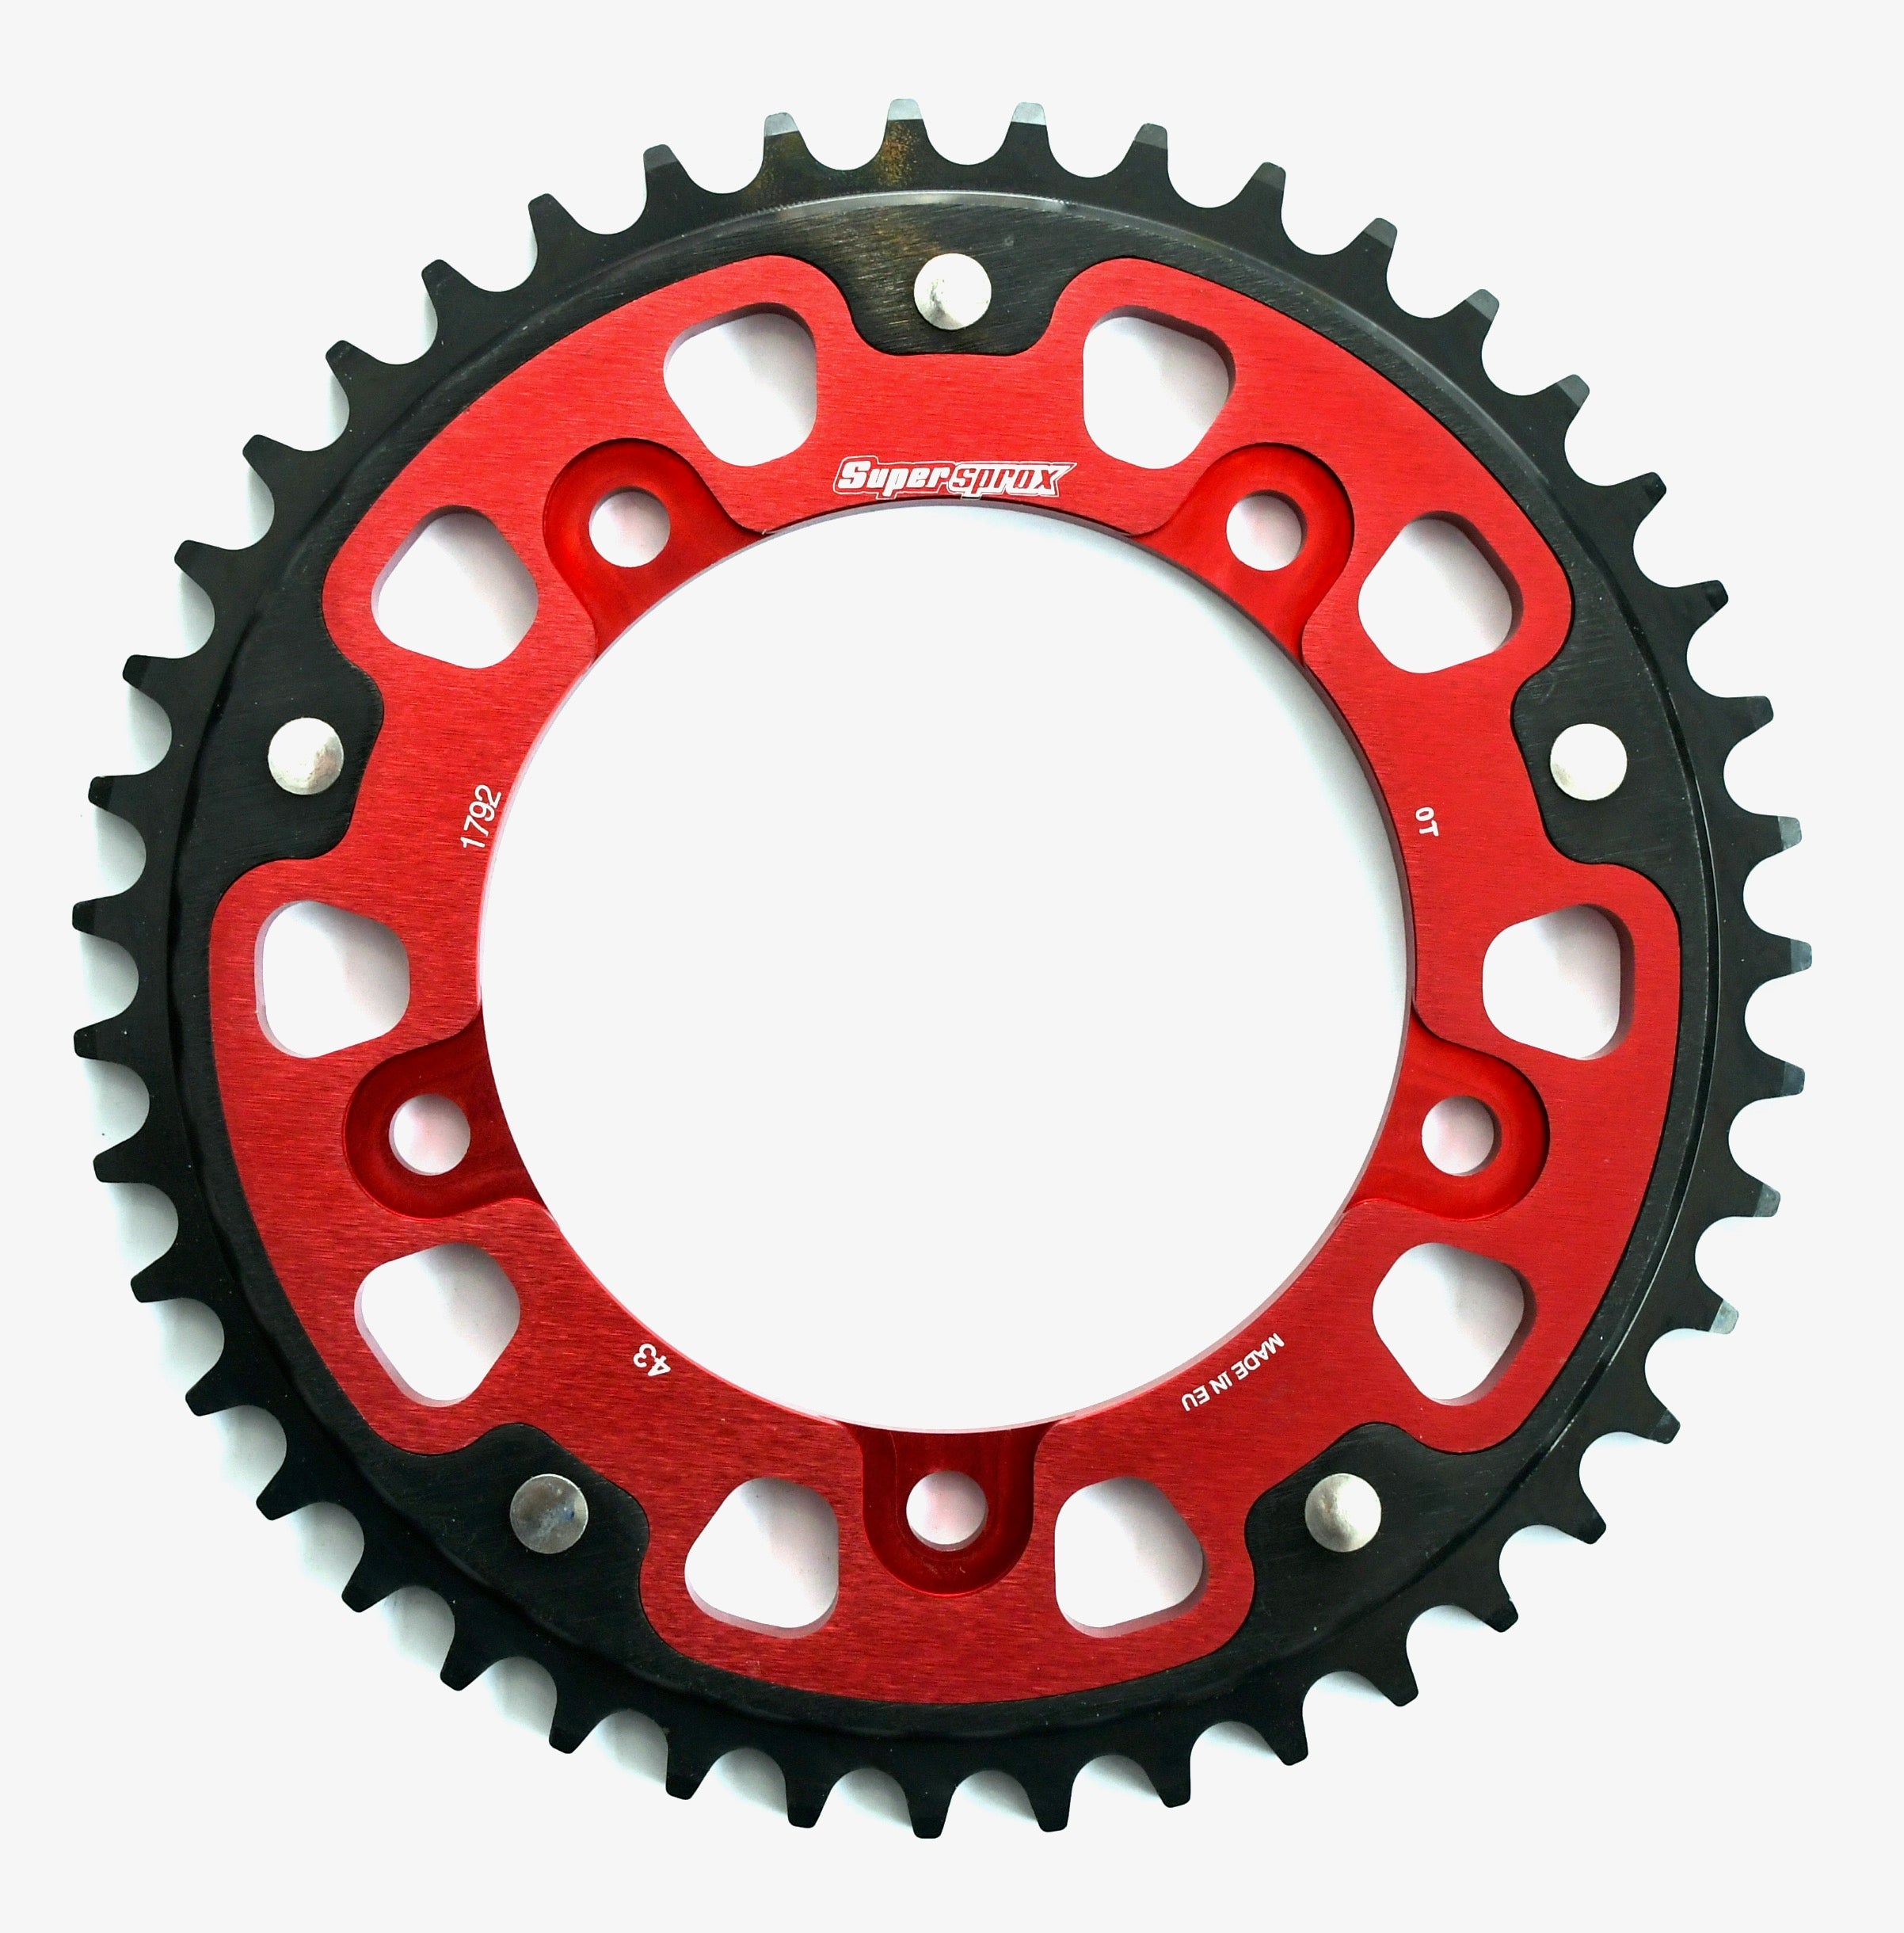 Supersprox Stealth Rear Sprocket RST1792 - Choose Your Gearing